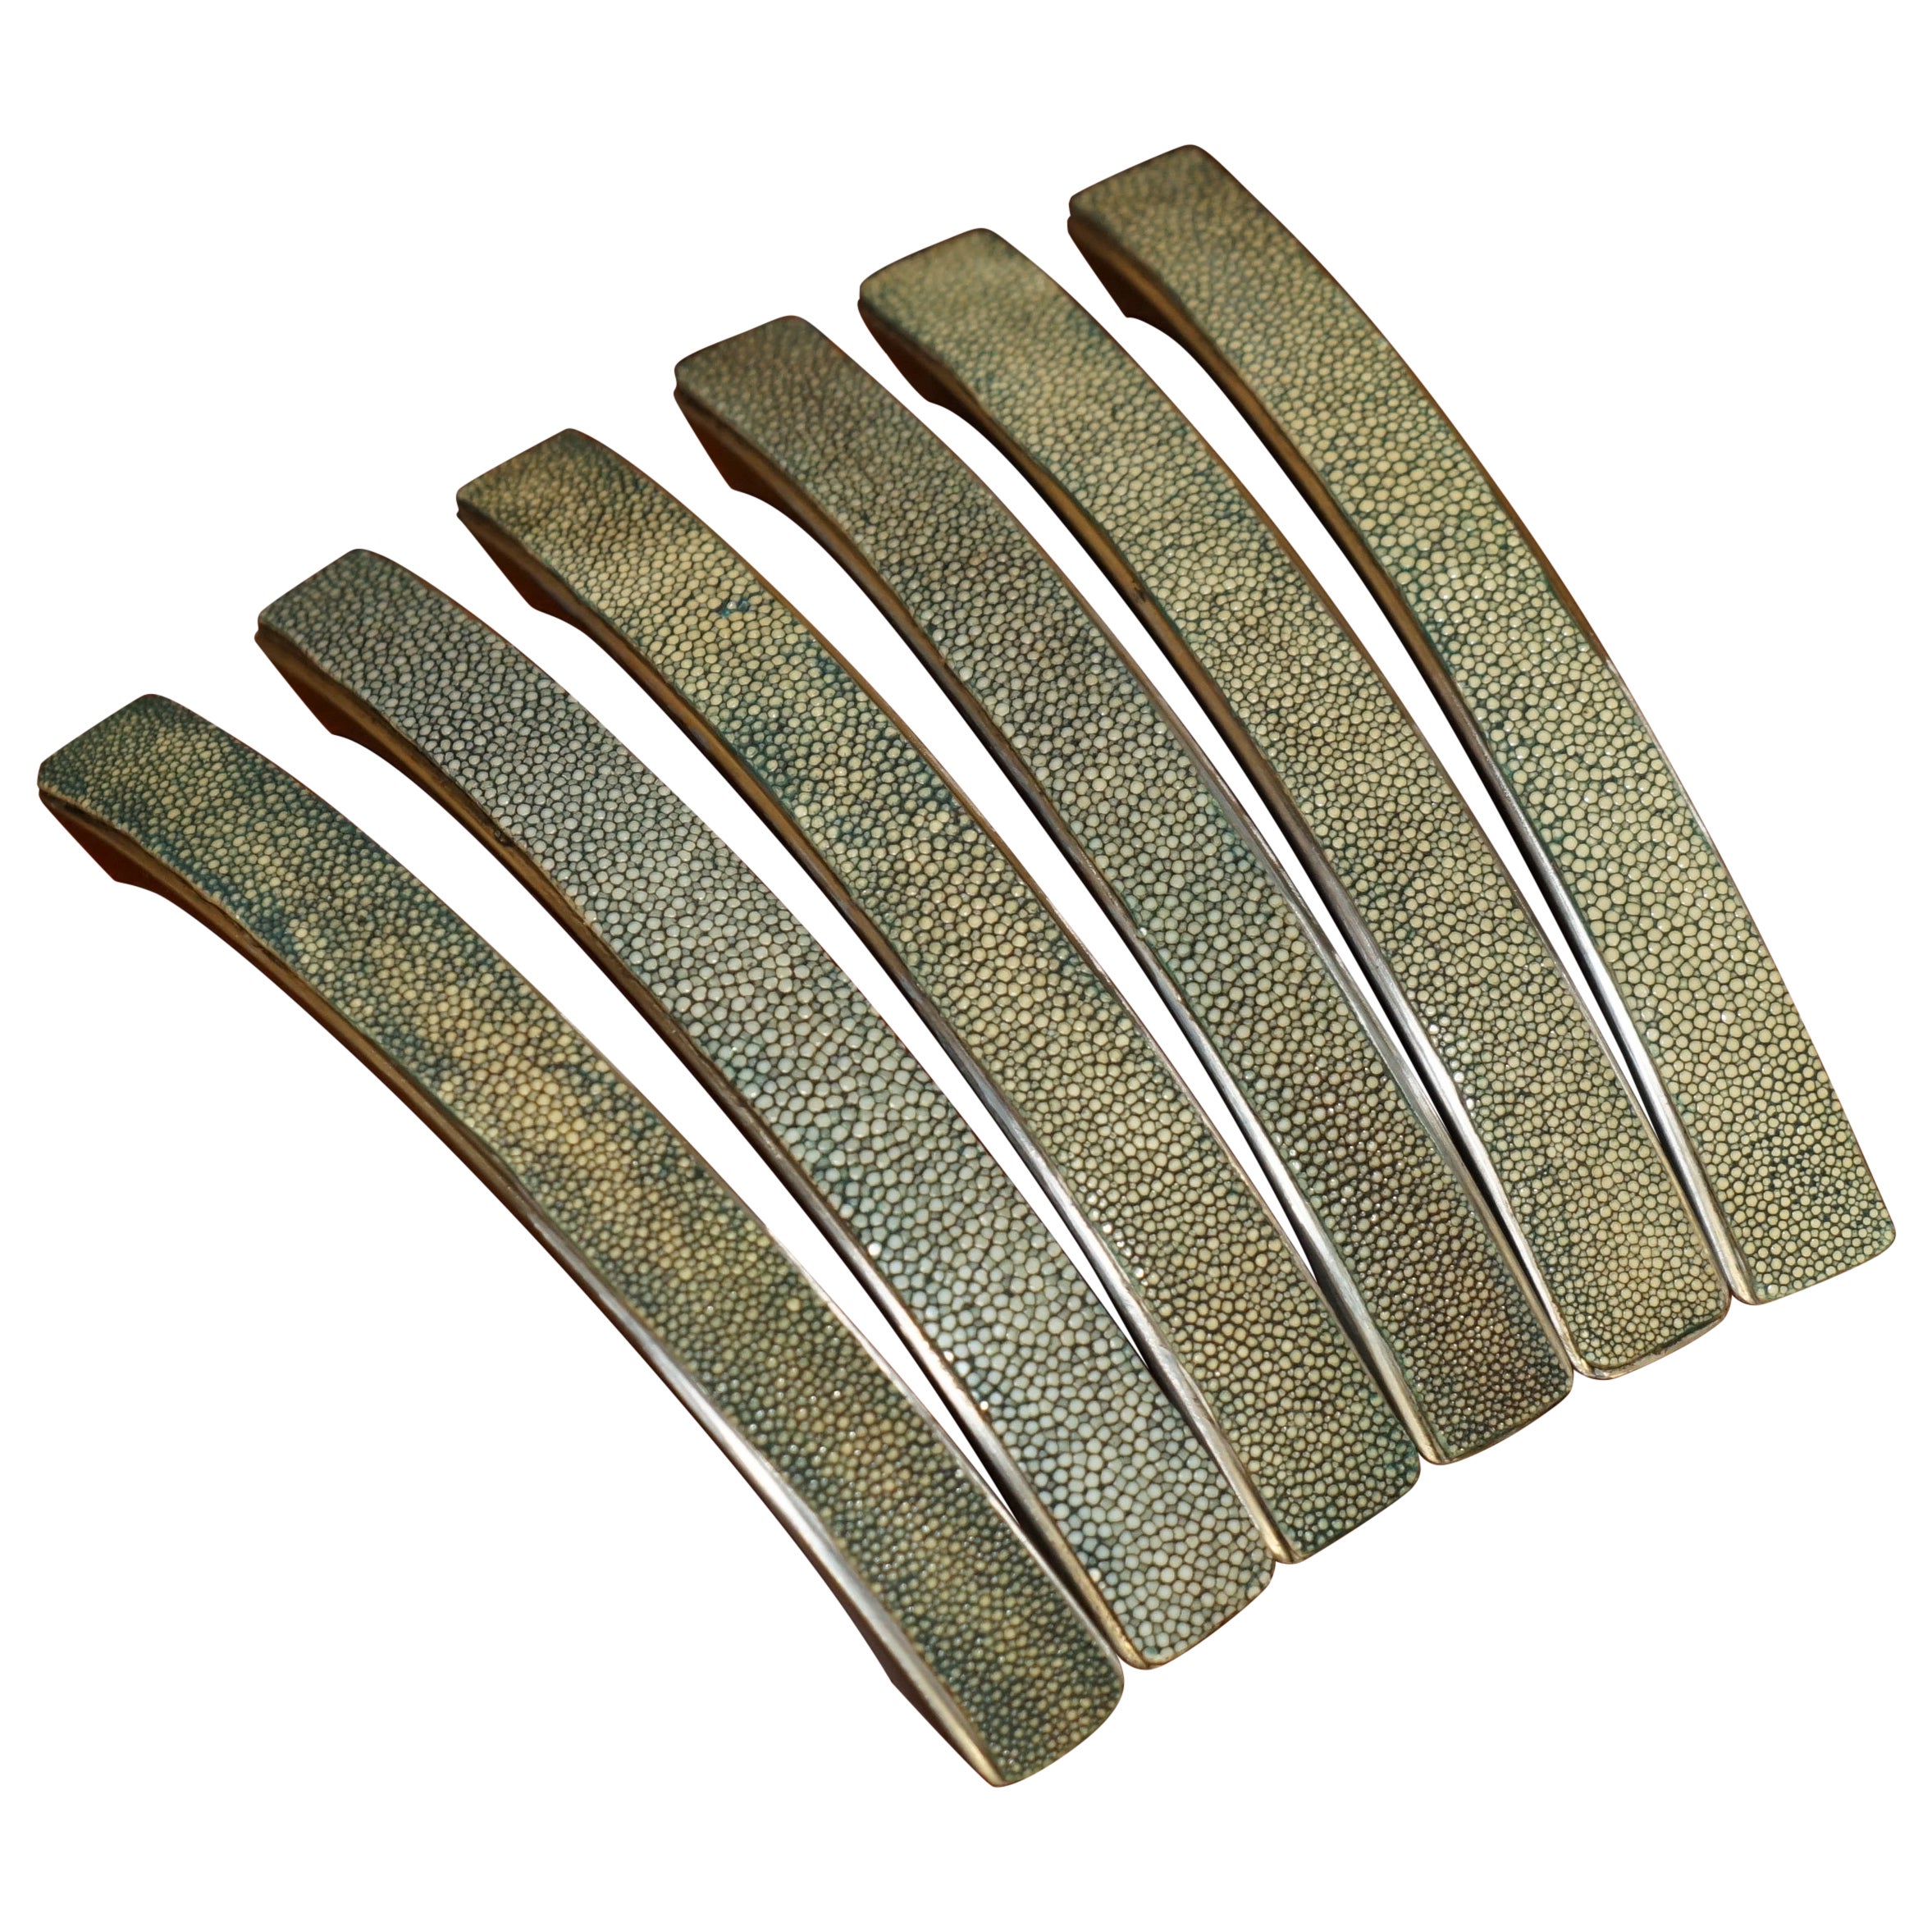 DECORATIVE SUiTE OF SIX SHAGREEN SHARK RAY SKIN DRAWER DESK CUPBOARD HANDLES For Sale